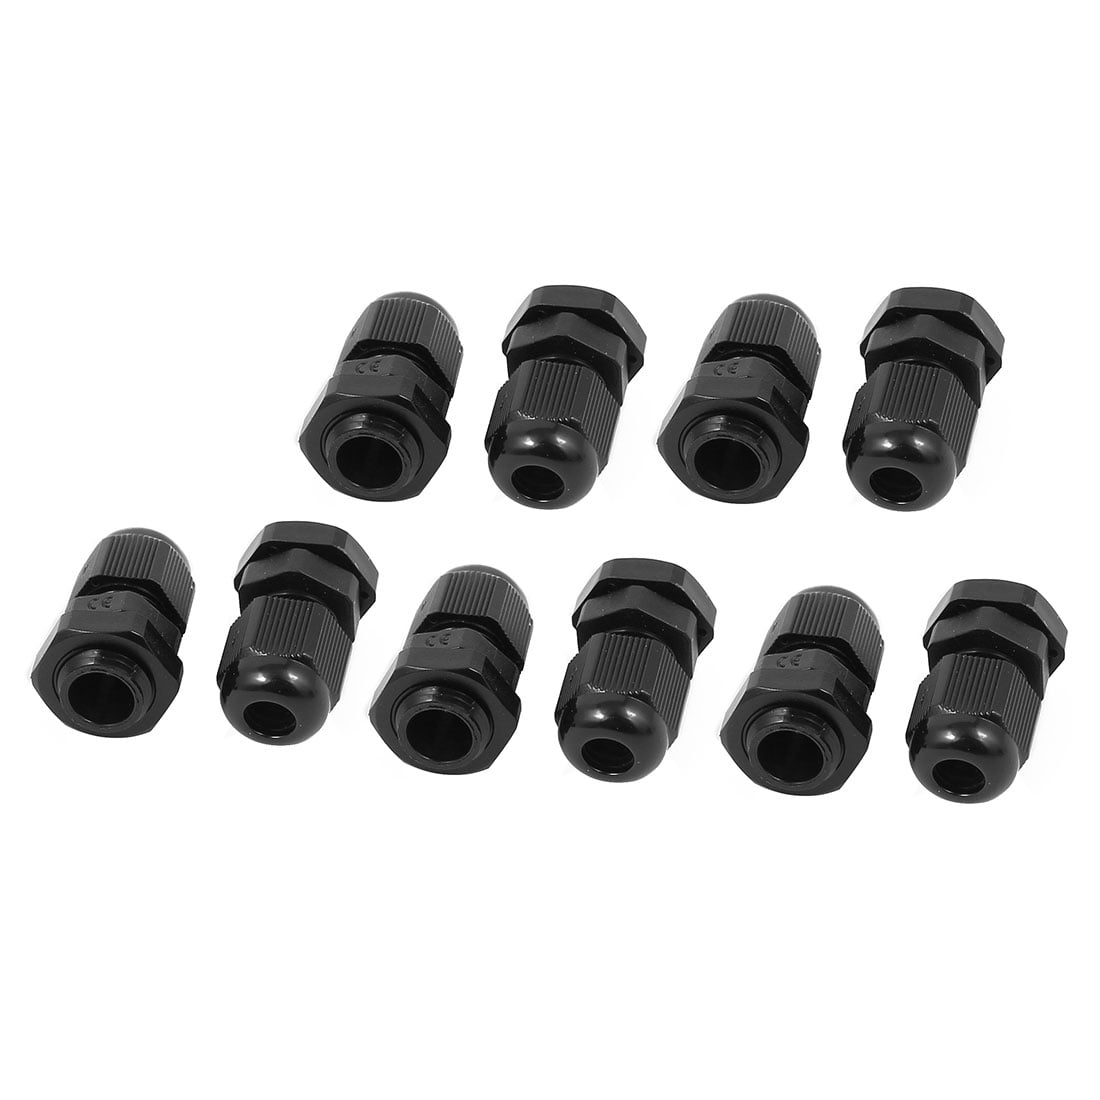 15 Pcs PG7 Waterproof Connector Gland Black for 4-7mm Diameter Cable